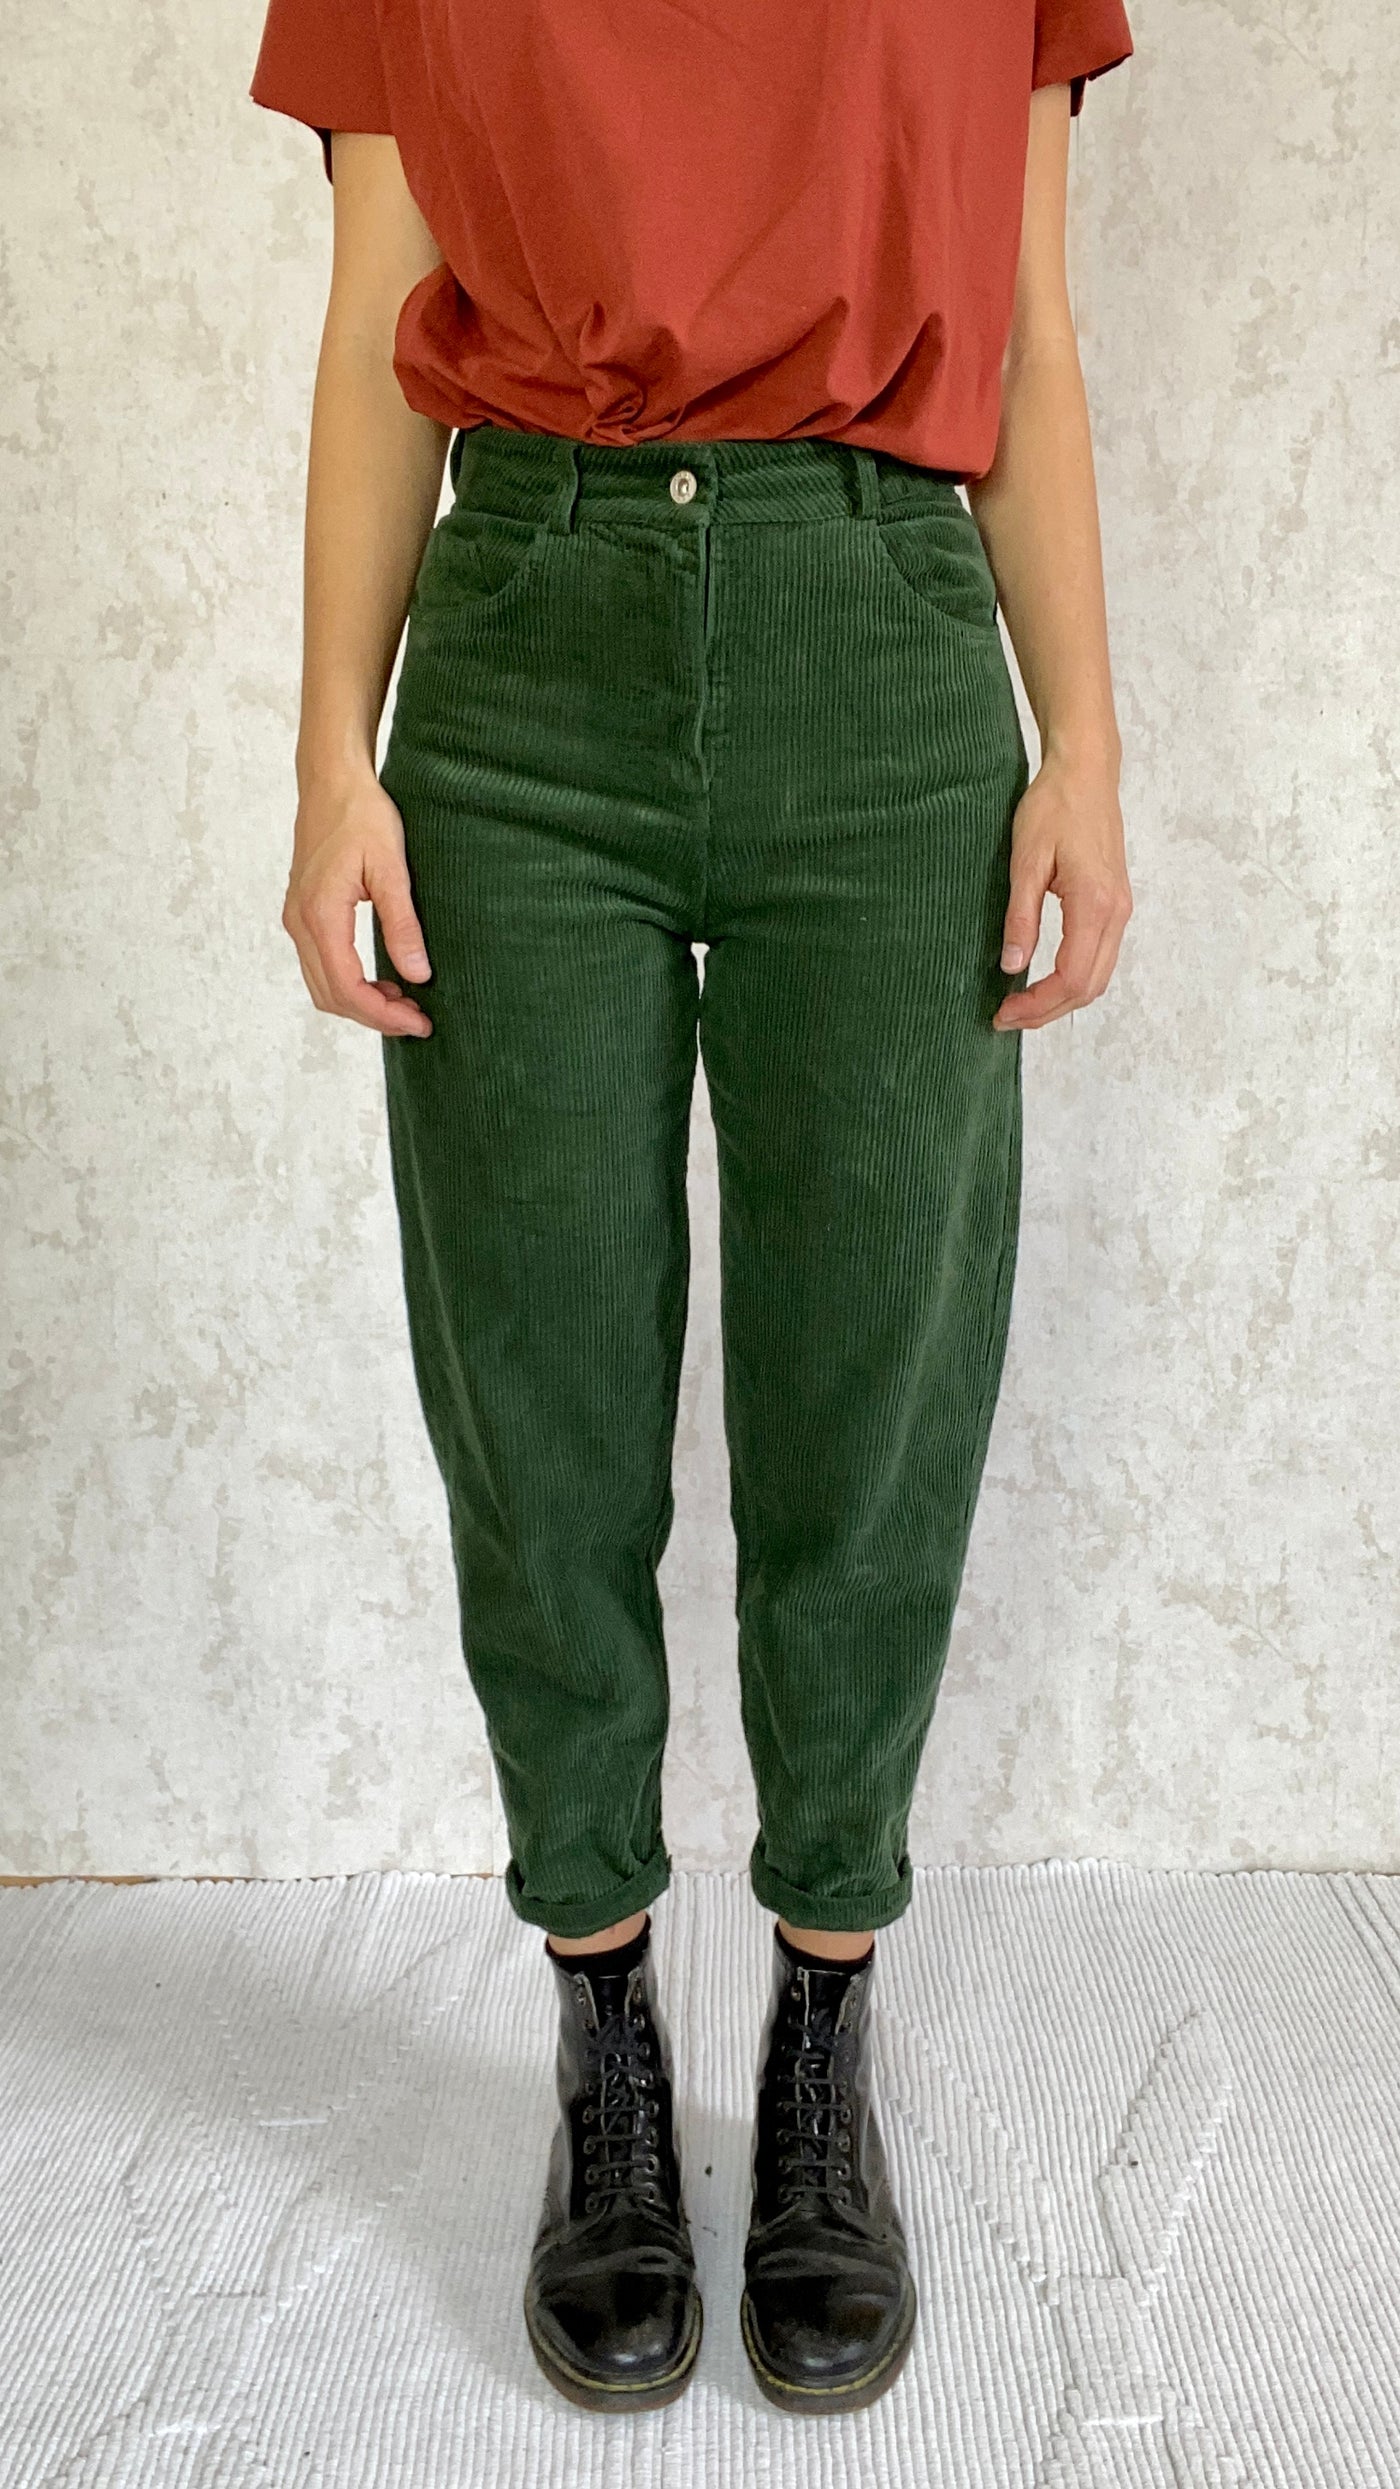 A woman wearing Cordhose retro 1990 made in Italy pants.